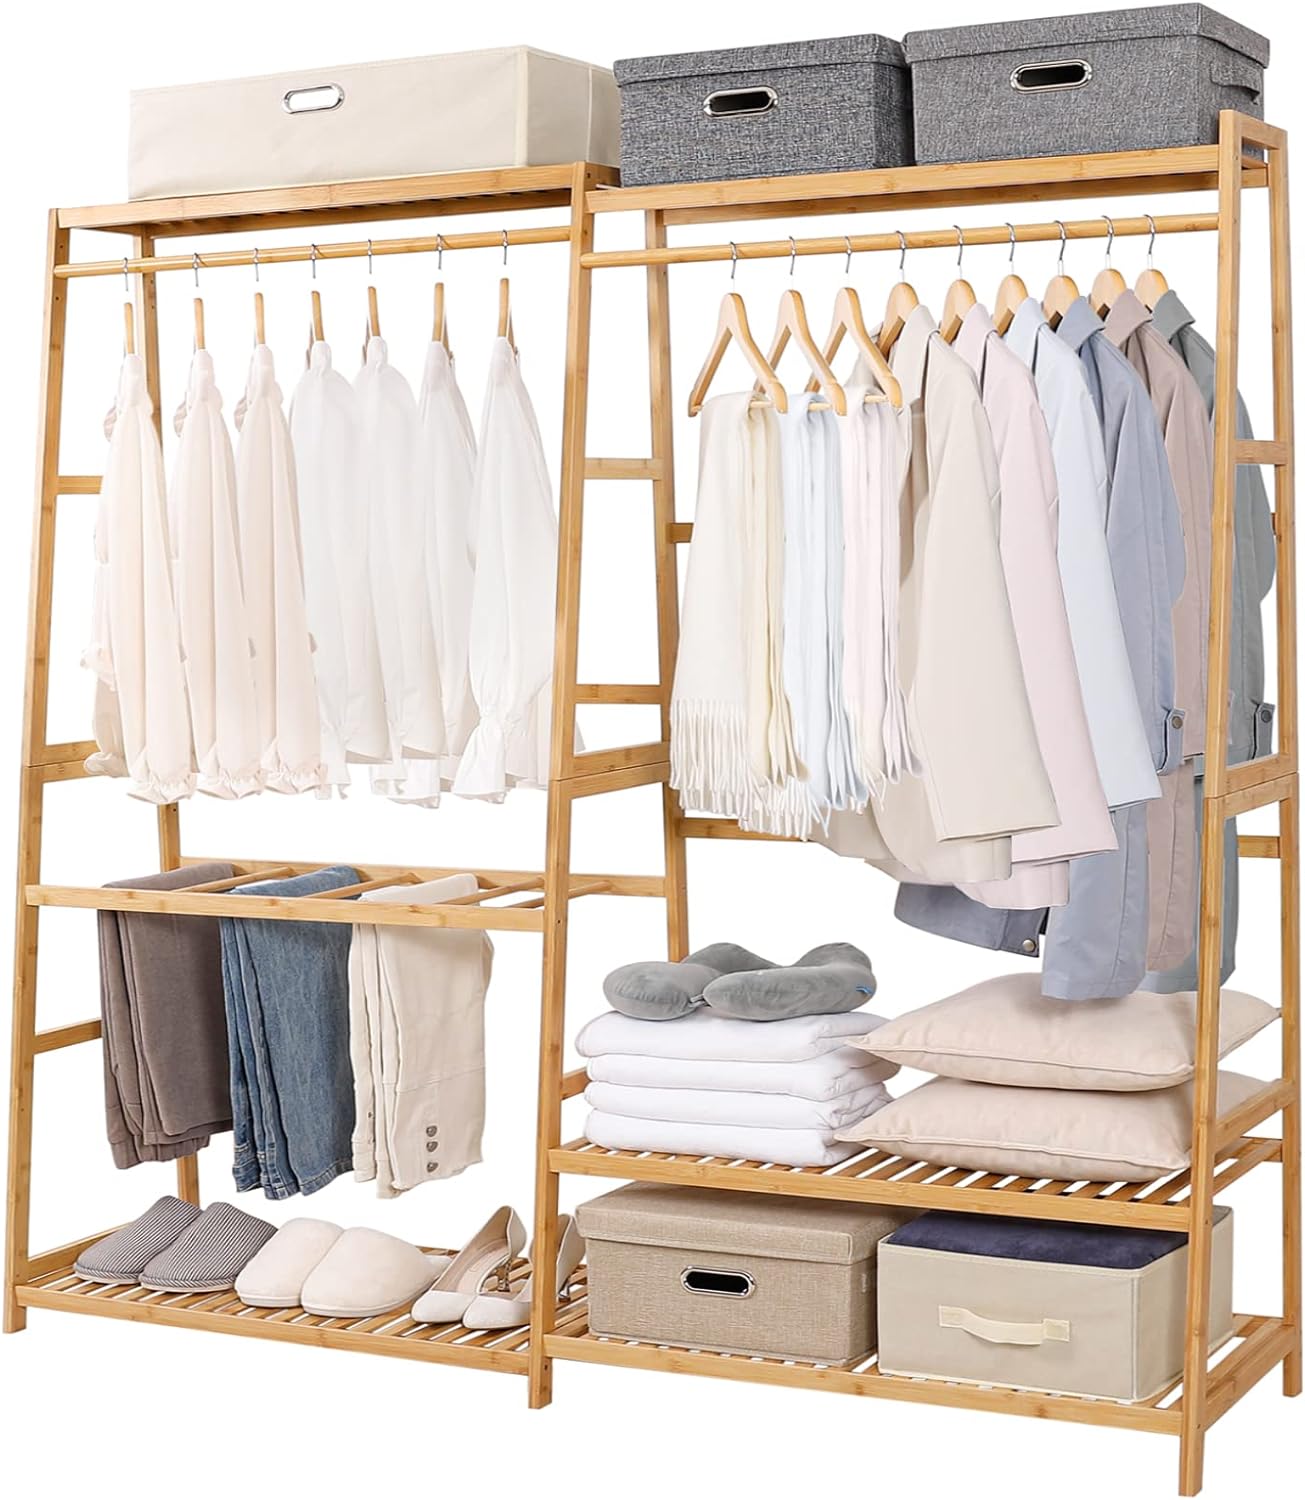 Homde Bamboo Clothes Rack Heavy Duty Garment Racks for Hanging Clothes, Max Load 440lbs, Freestanding Clothing Rack Closet with 6 Shelves, 67" H*61" W*15.74" D